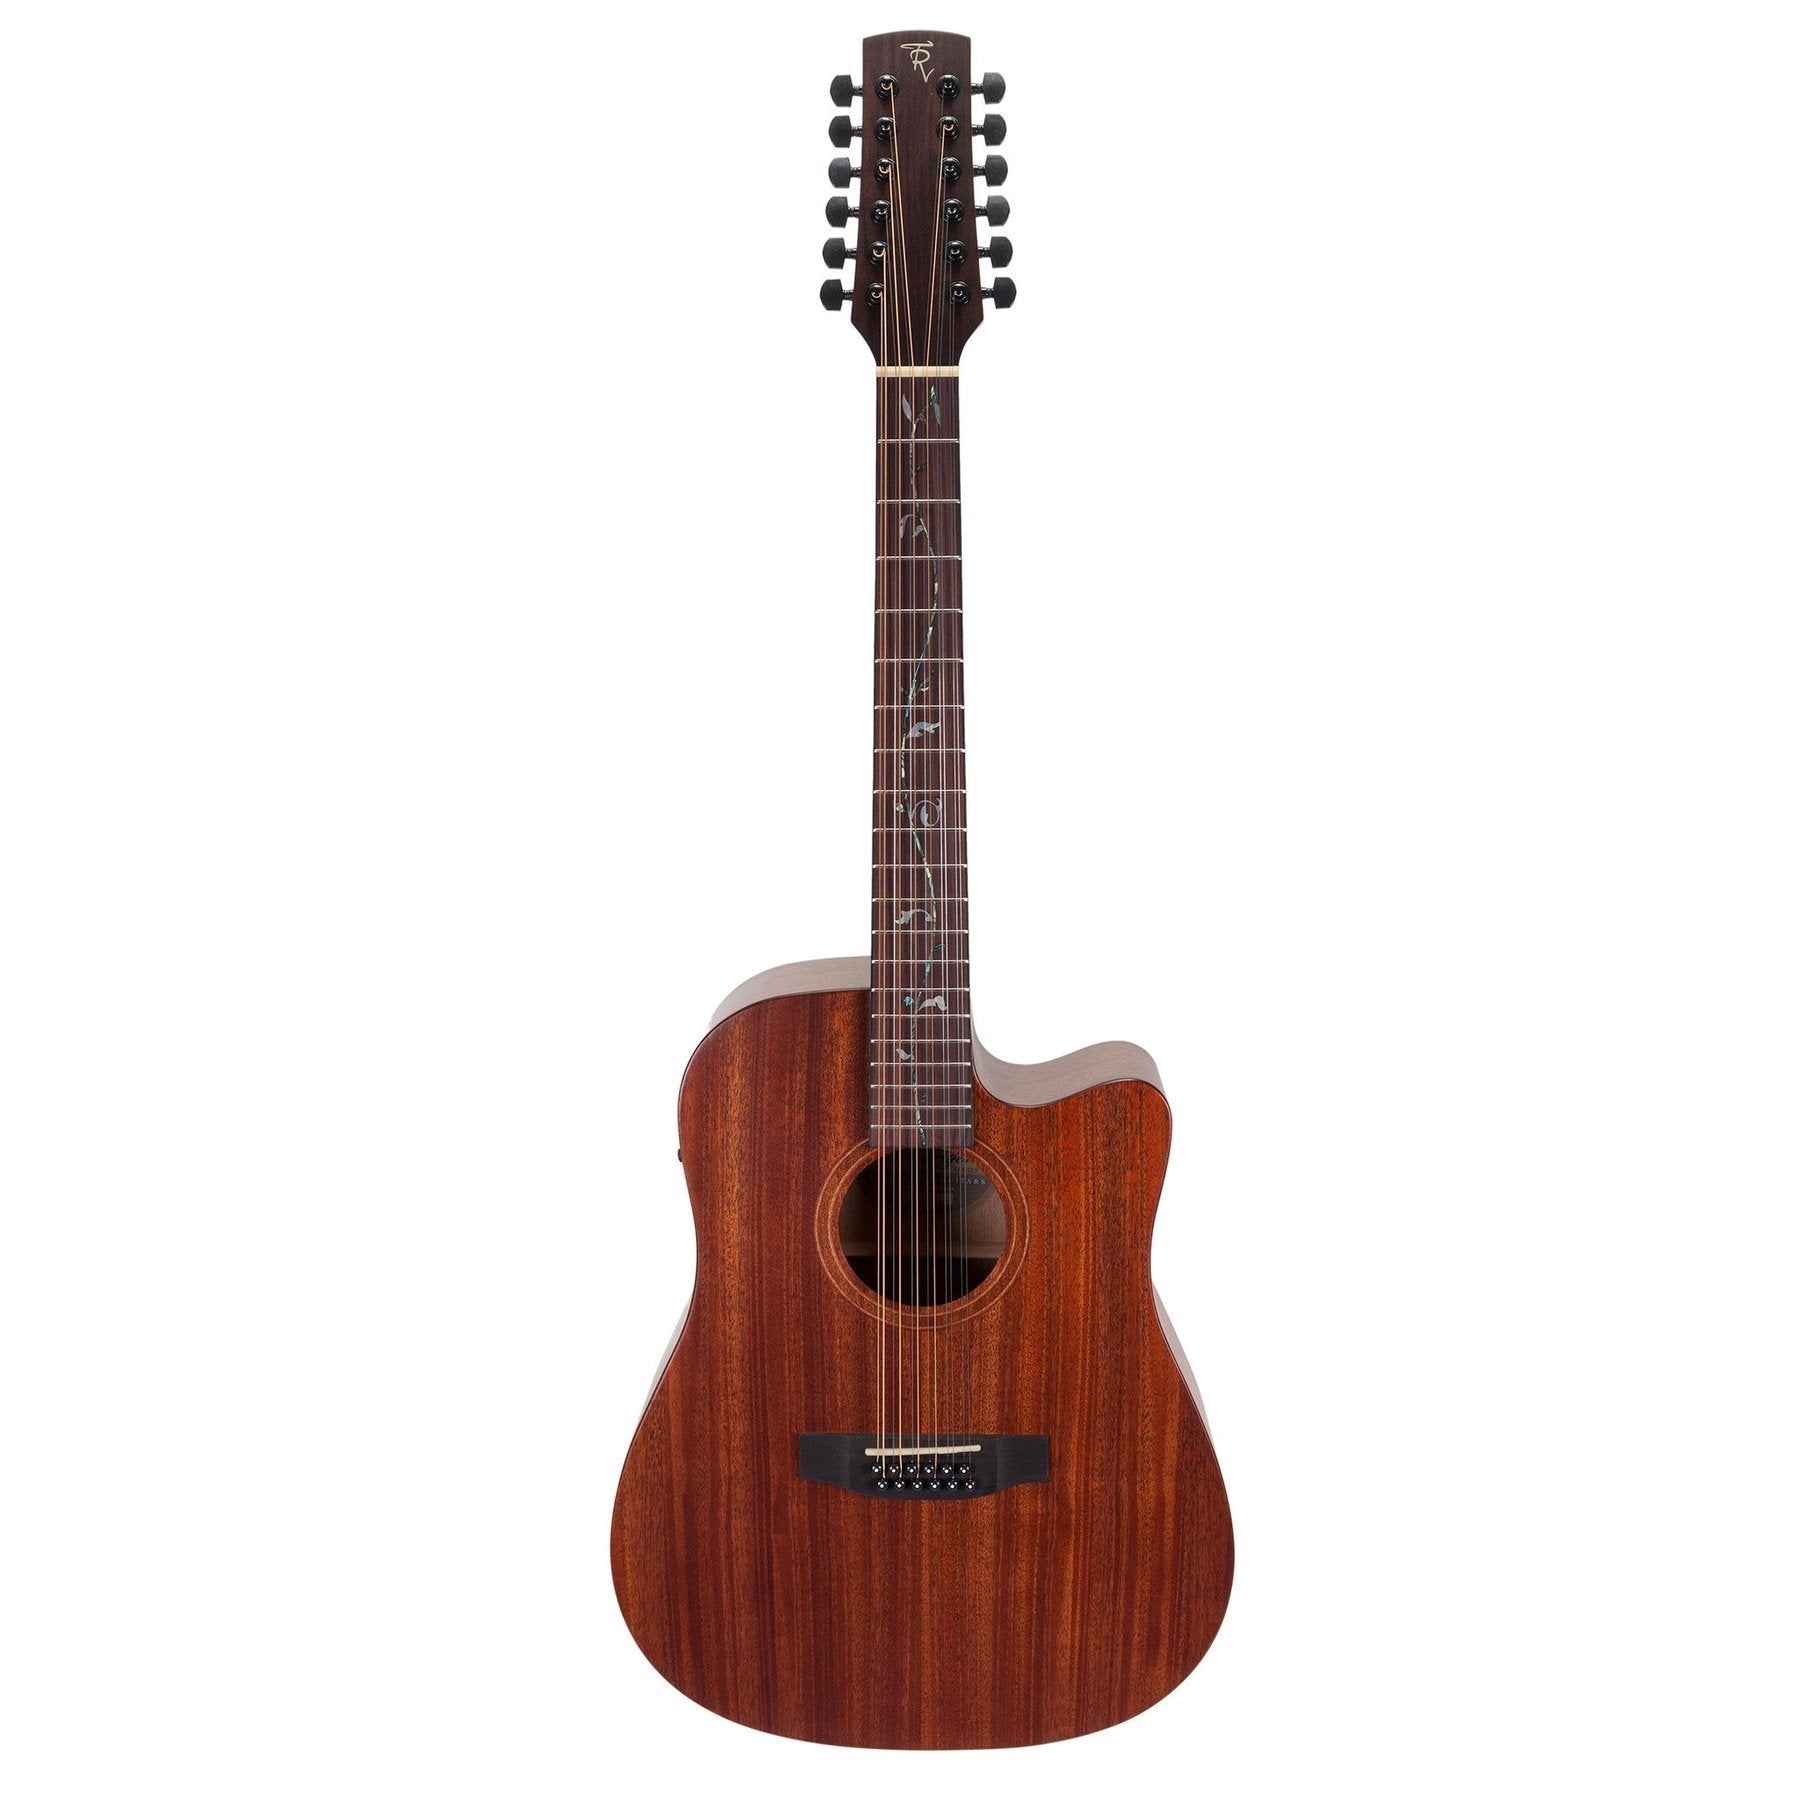 Timberidge 'Messenger Series' 12-String Mahogany Solid Top Acoustic-Electric Dreadnought Cutaway Guitar with 'Tree of Life' Inlay (Natural Satin) - Musiclandshop